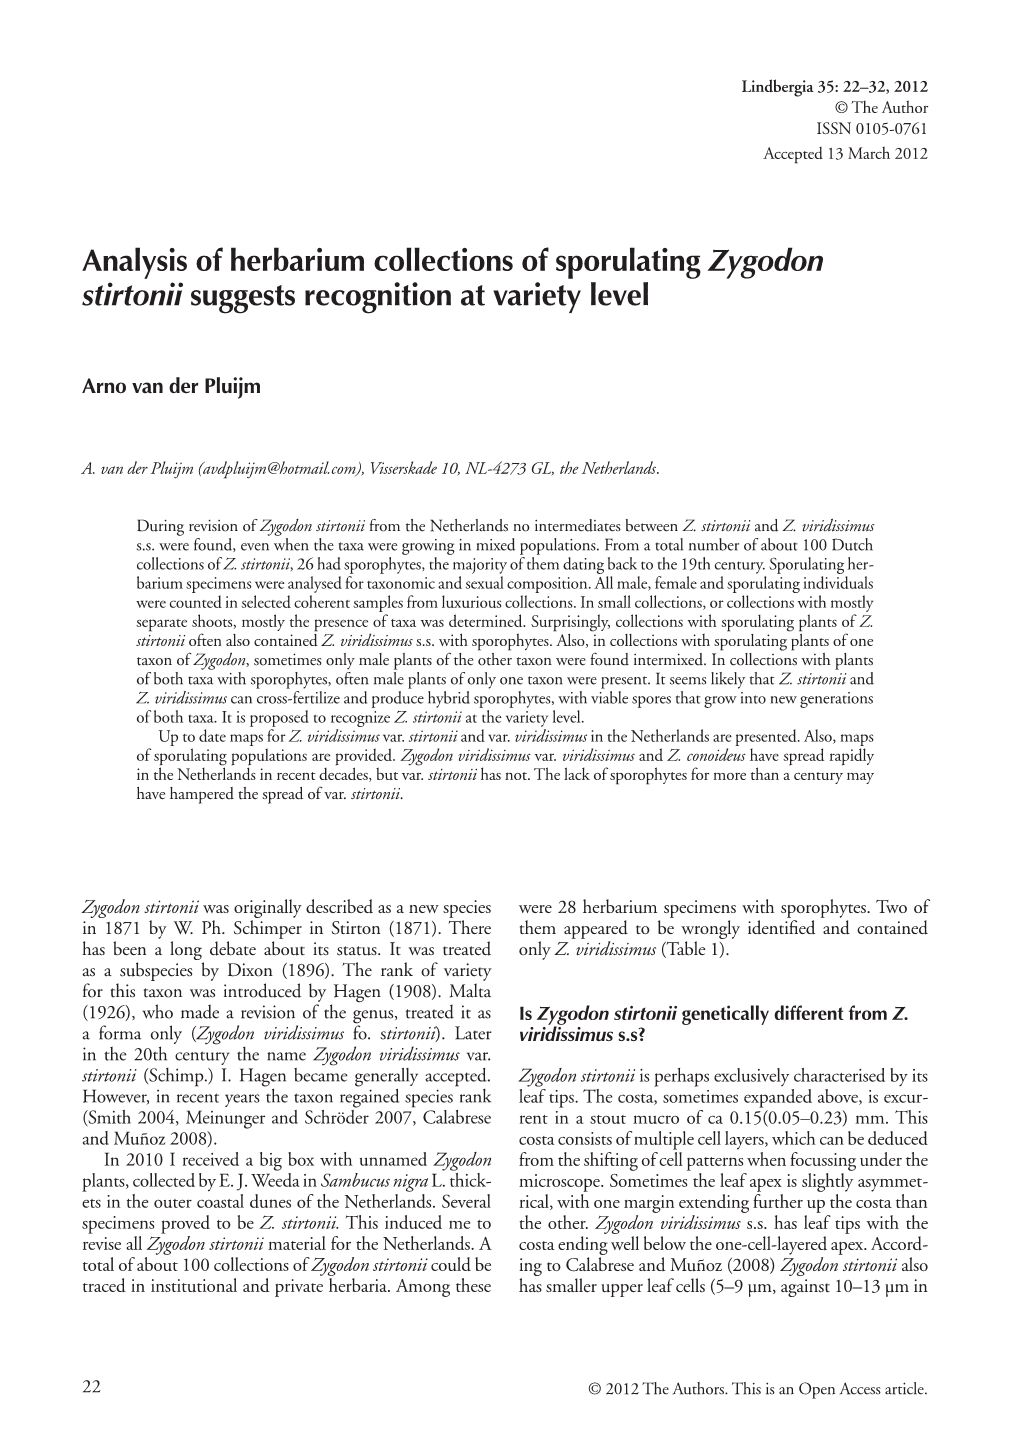 Analysis of Herbarium Collections of Sporulating Zygodon Stirtonii Suggests Recognition at Variety Level